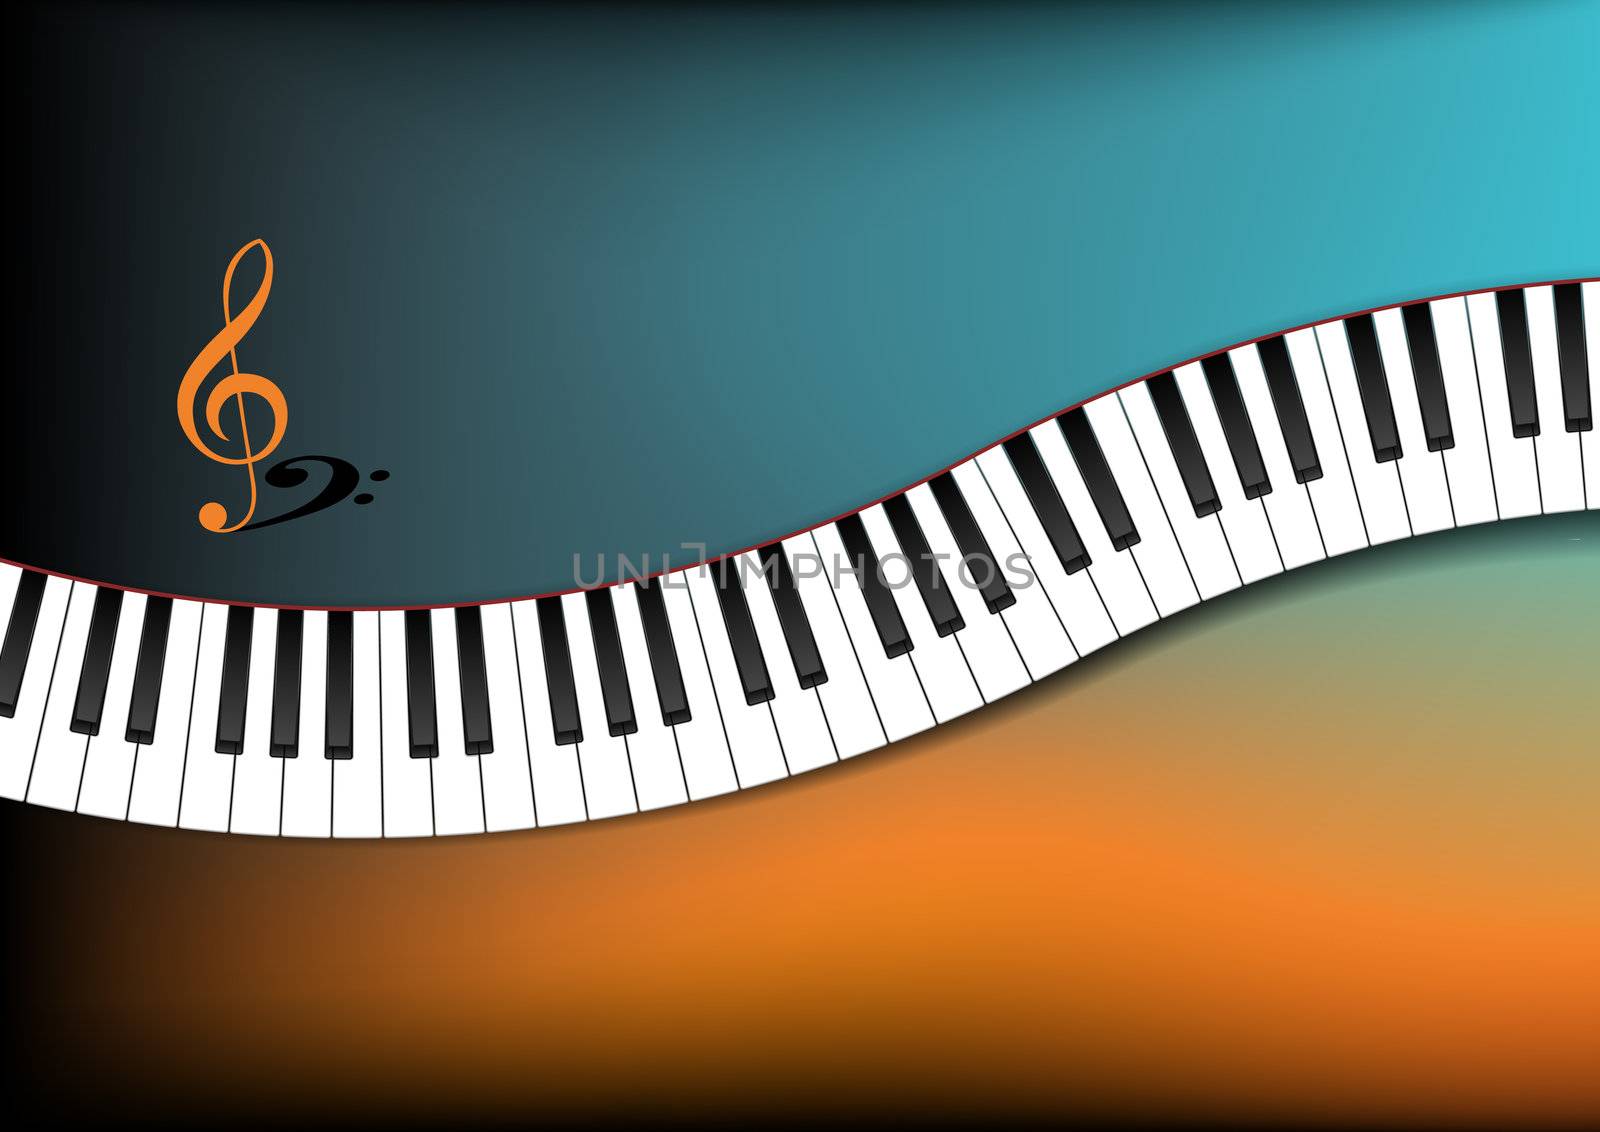 Teal and Orange Background Curved Piano Keyboard by bmelo